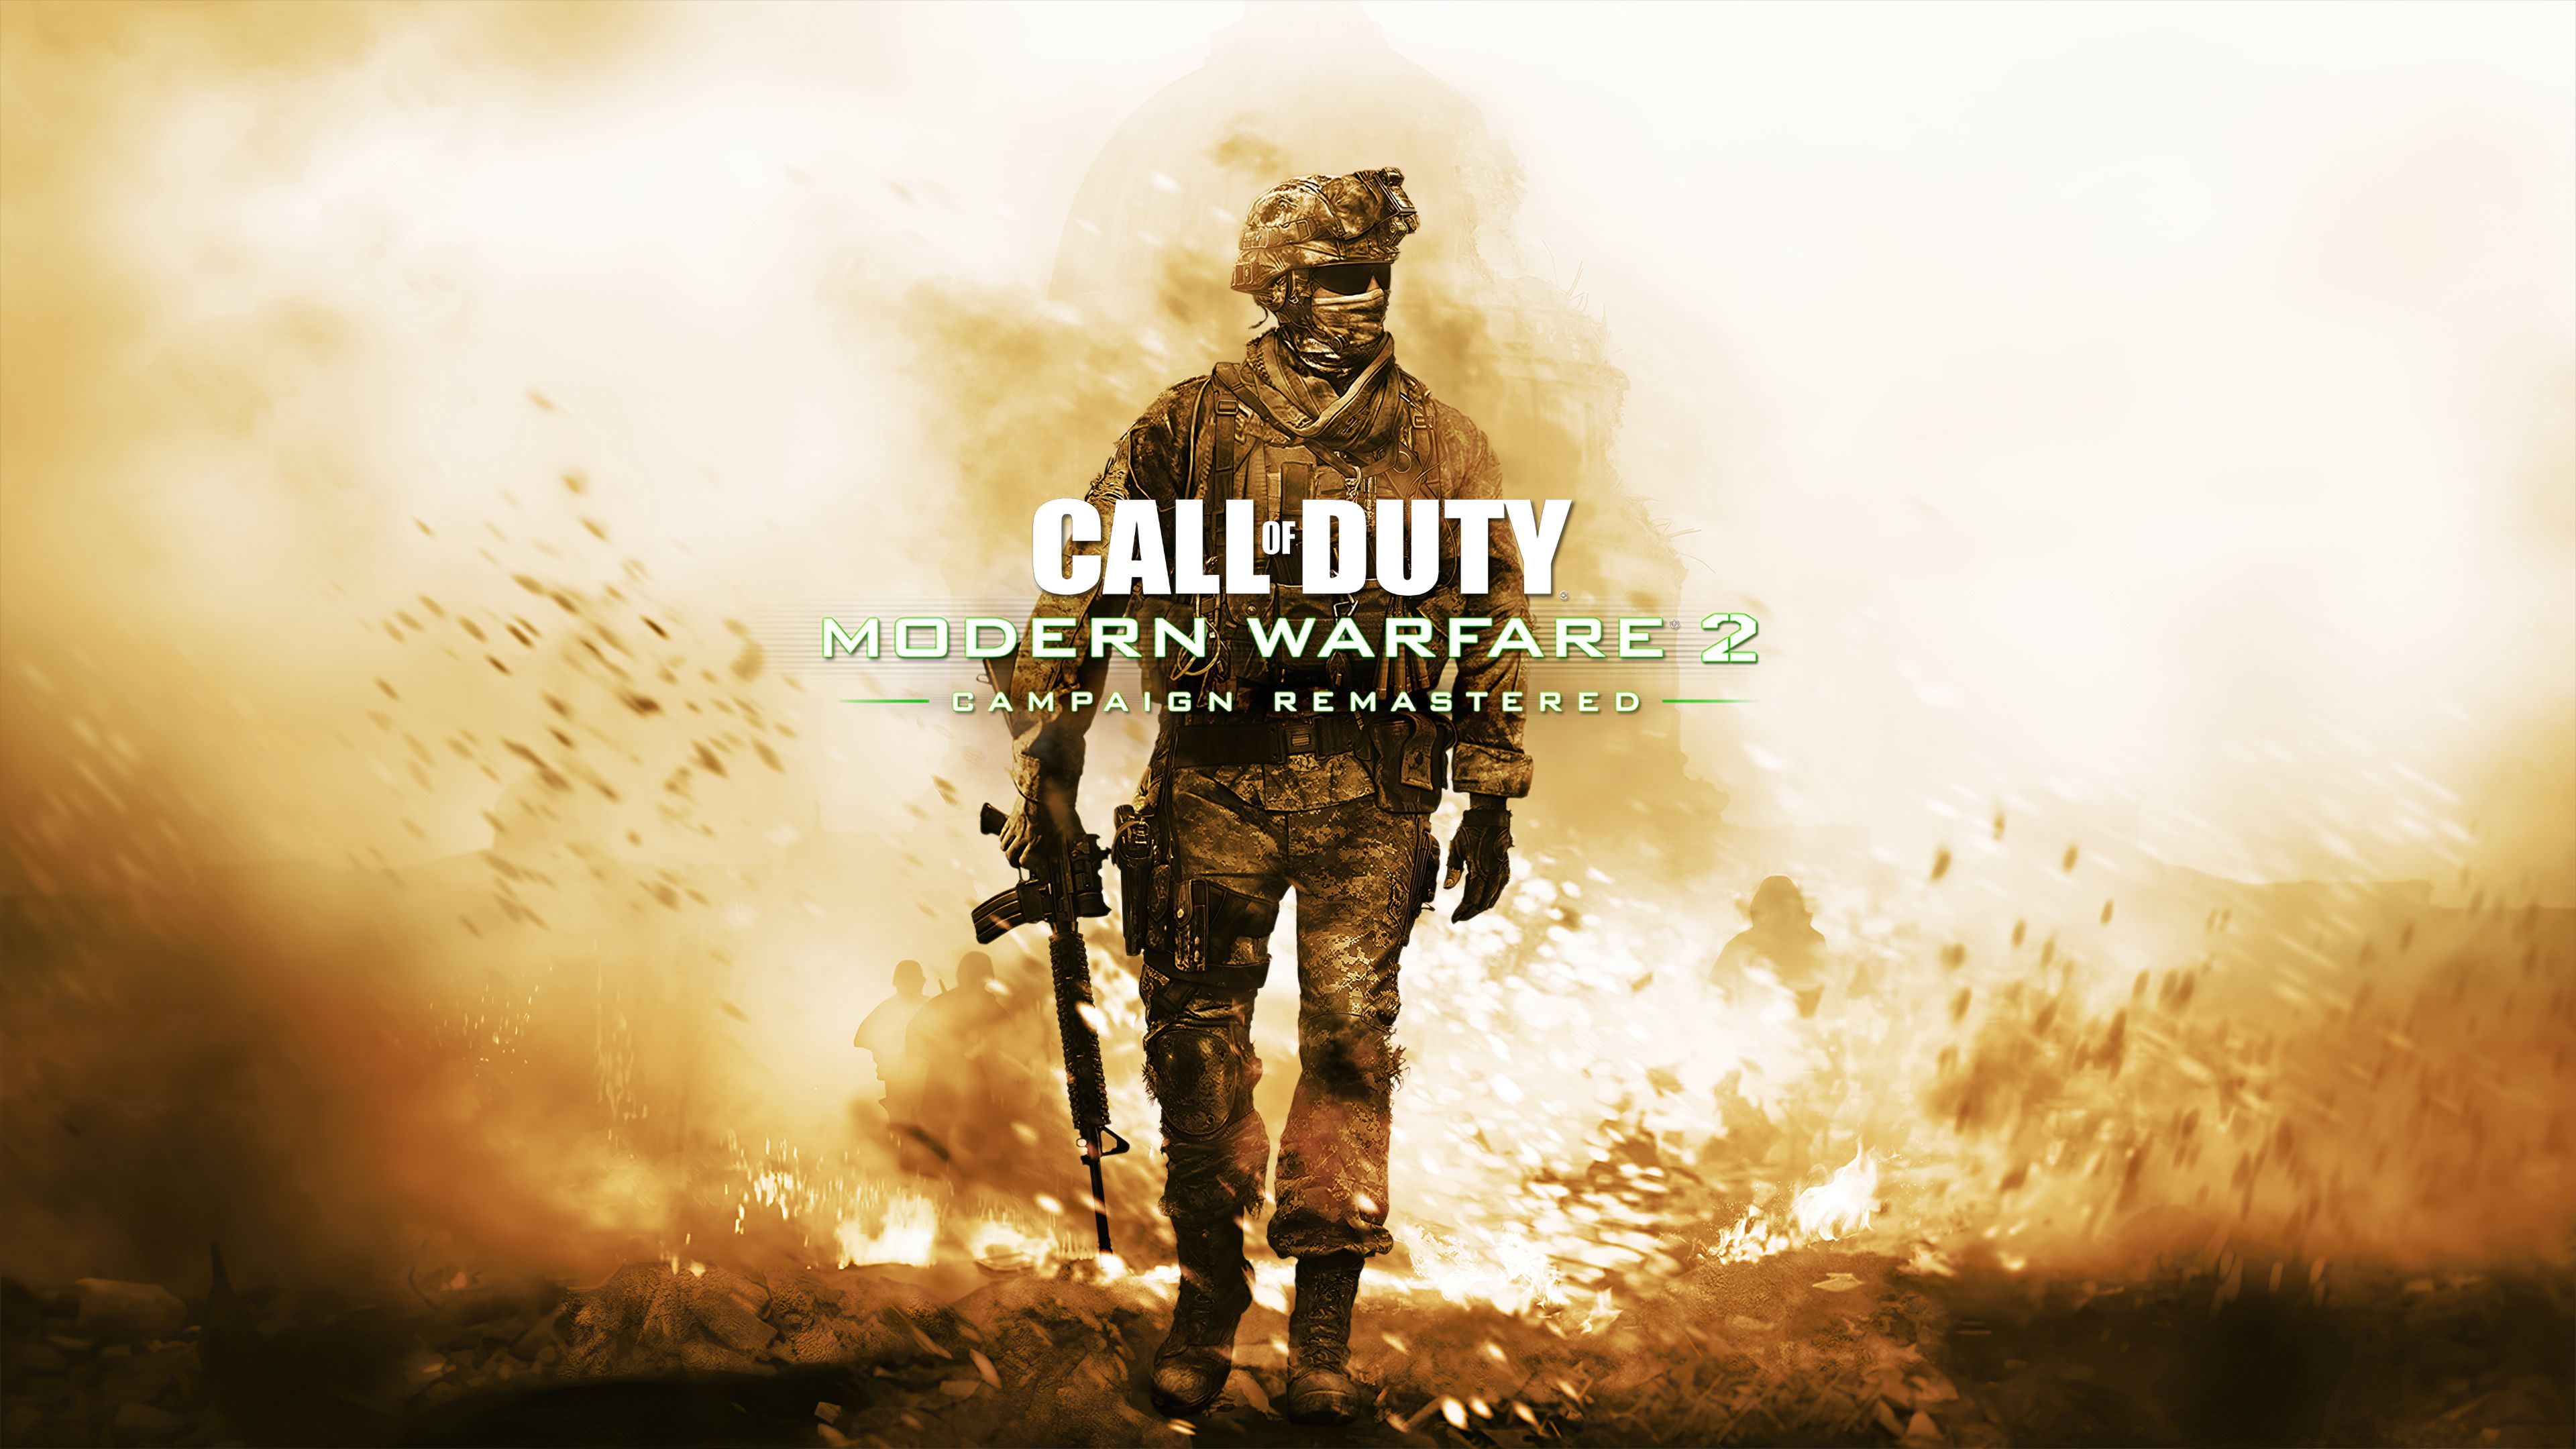 Call Of Duty Modern Warfare 2 Campaign Remastered 4k, HD Games, 4k Wallpapers, Image, Backgrounds, Photos and Pictures